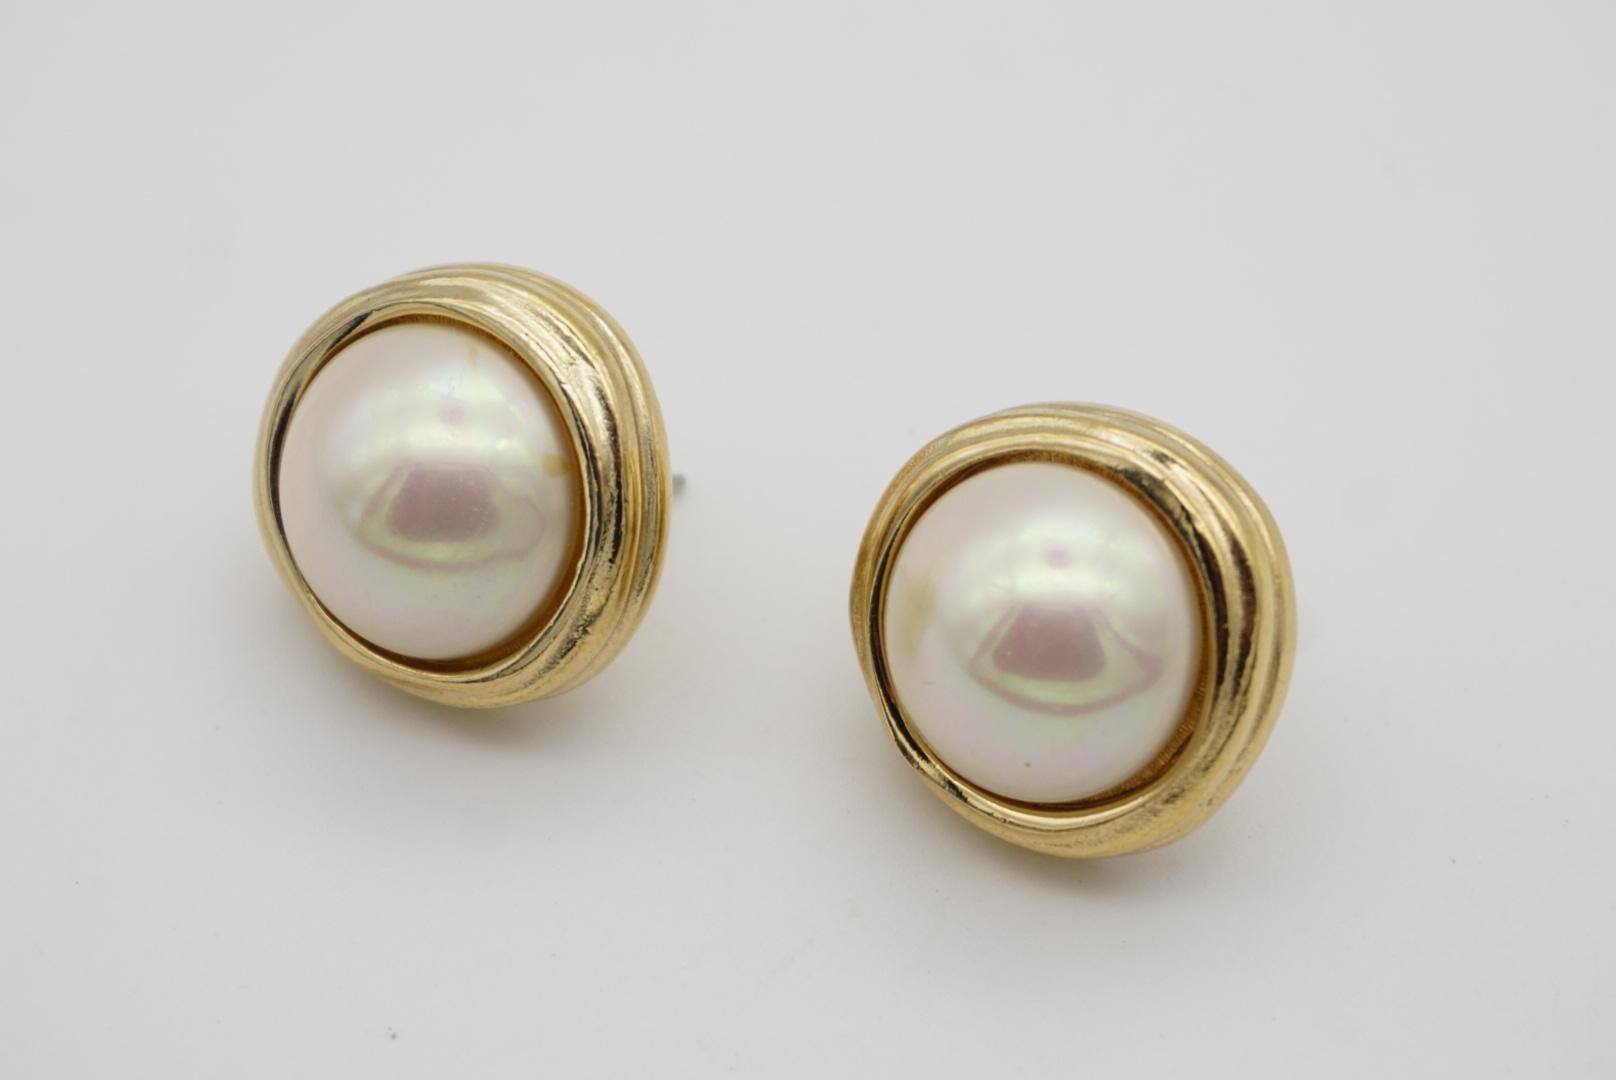 Christian Dior Vintage 1980s Irregular Large Round Faux Pearl Pierced Earrings In Excellent Condition For Sale In Wokingham, England